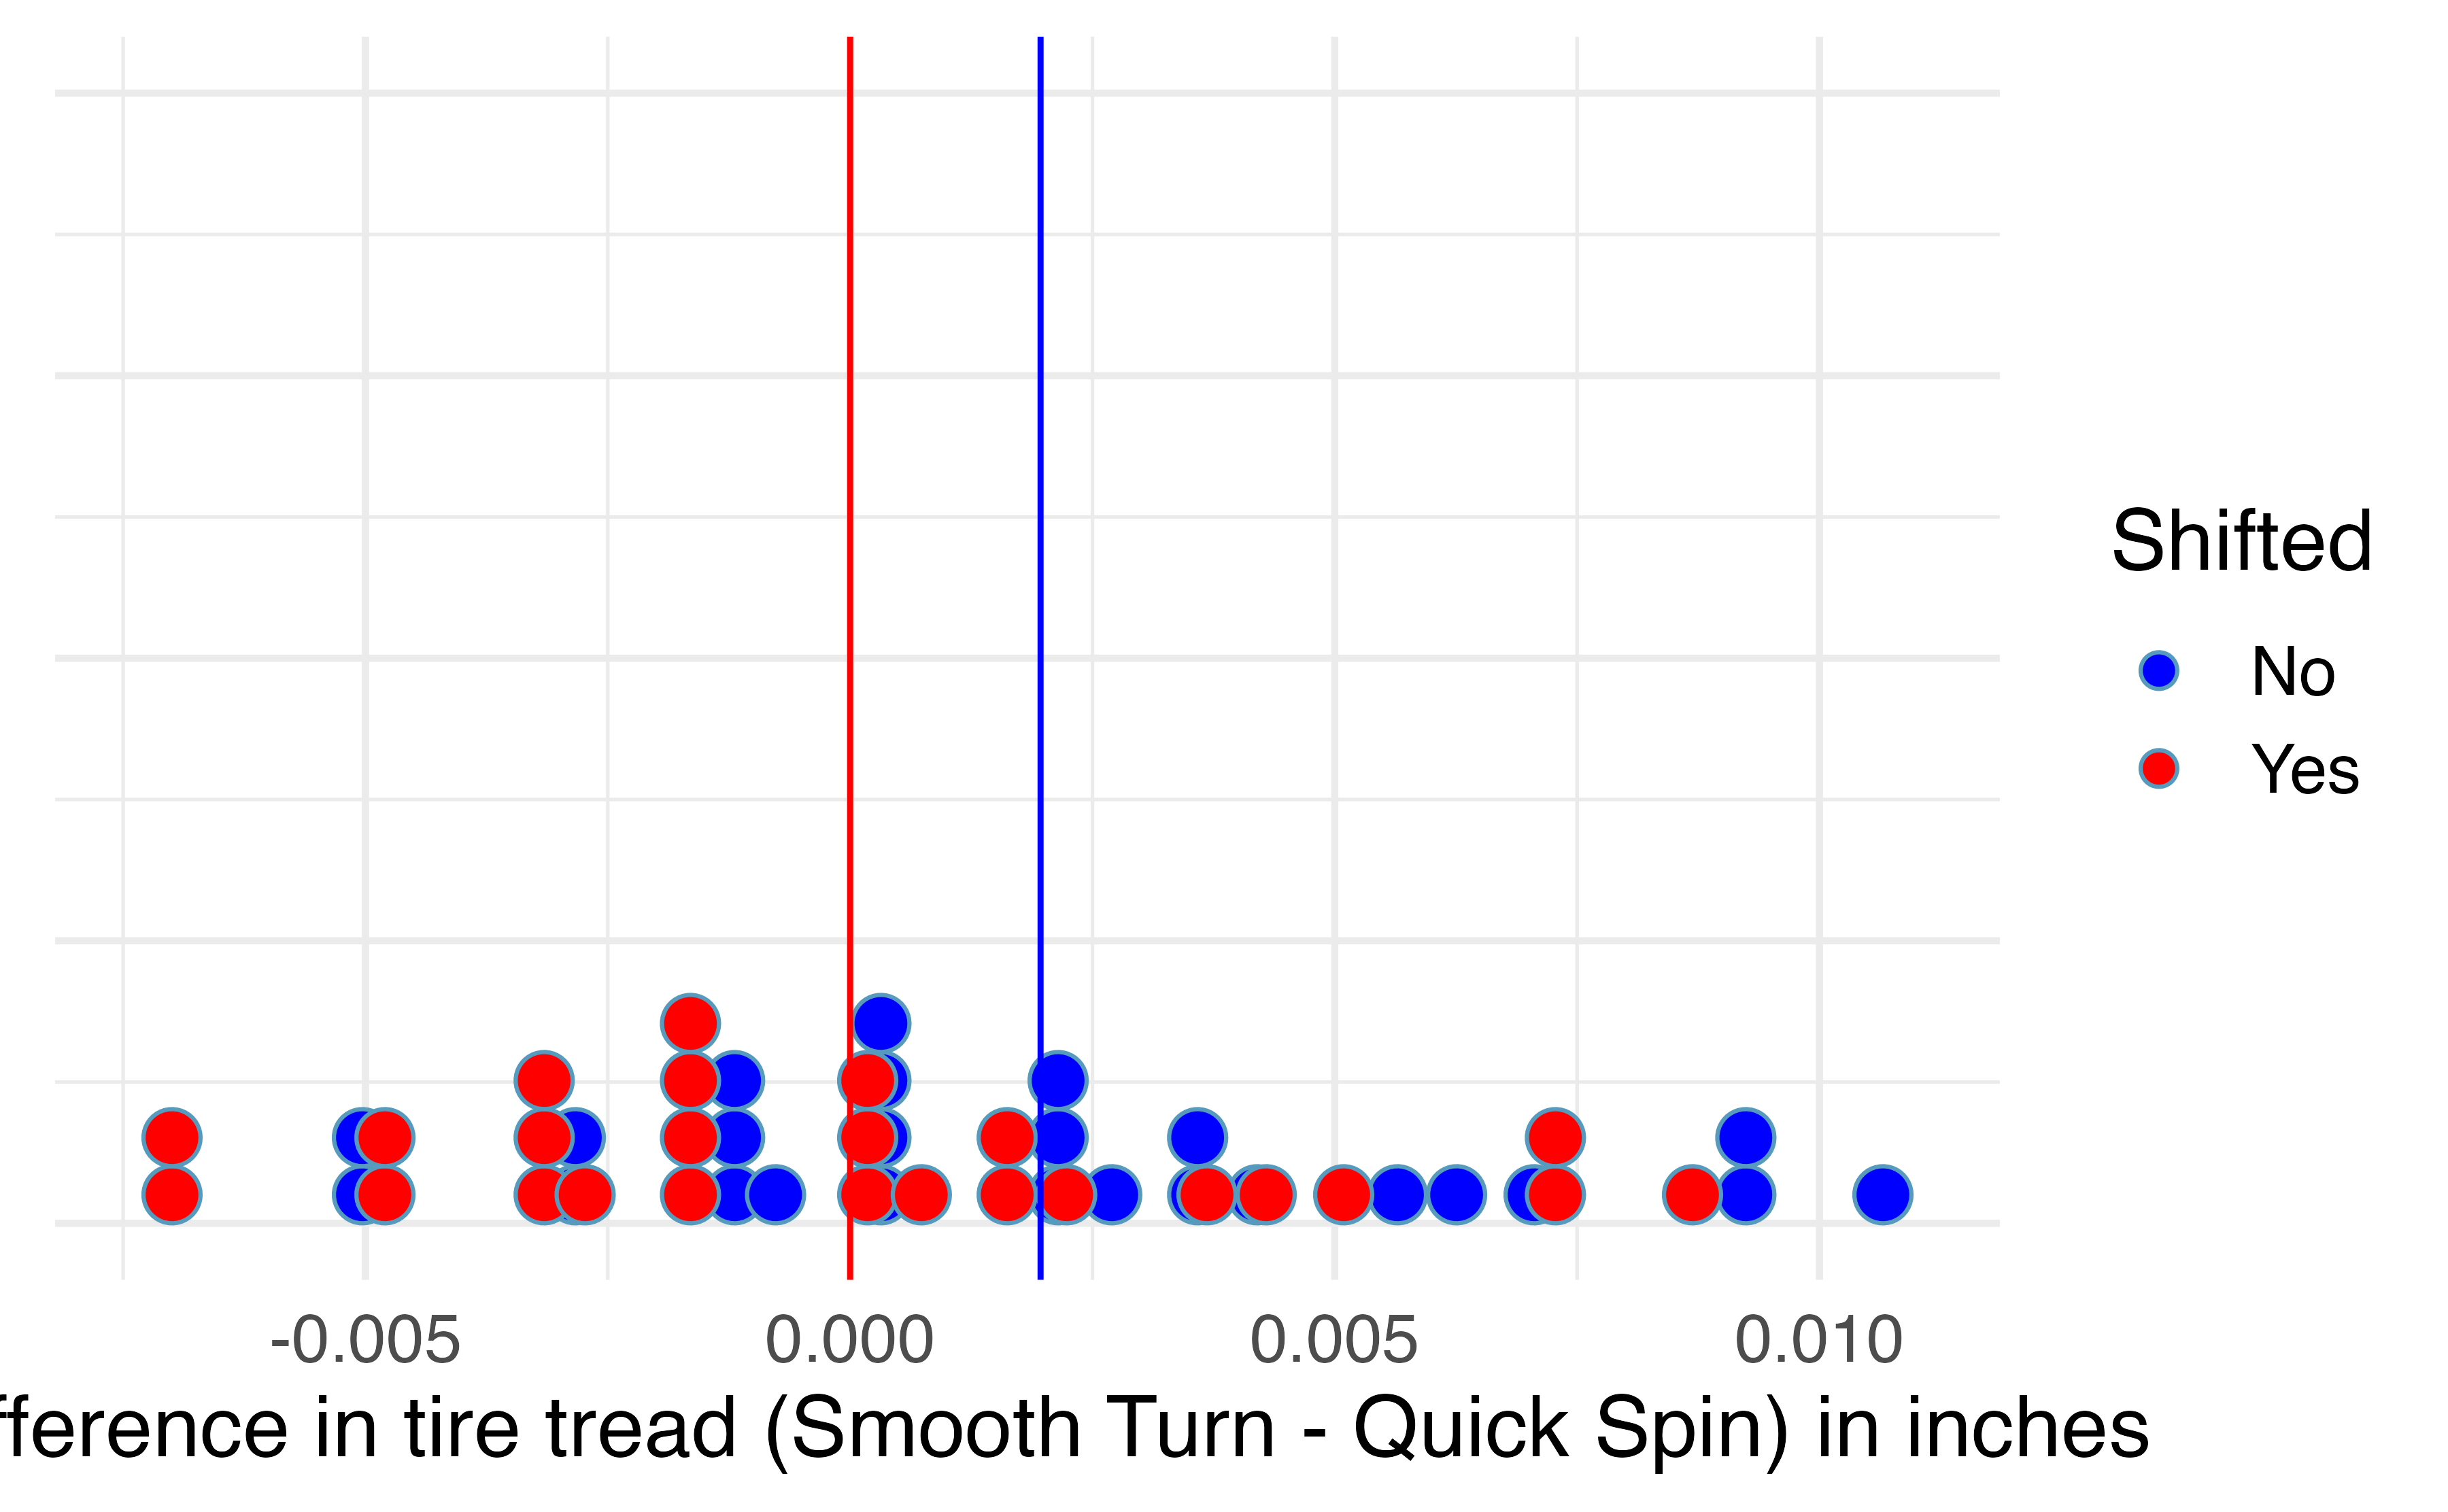 Mean difference in tire tread (in inches) remaining after 1,000 miles between the two brands (Smooth Turn -- Quick Spin) (blue), and the shifted mean differences in tire tread (red), found by subtracting 0.00196 to each original difference.